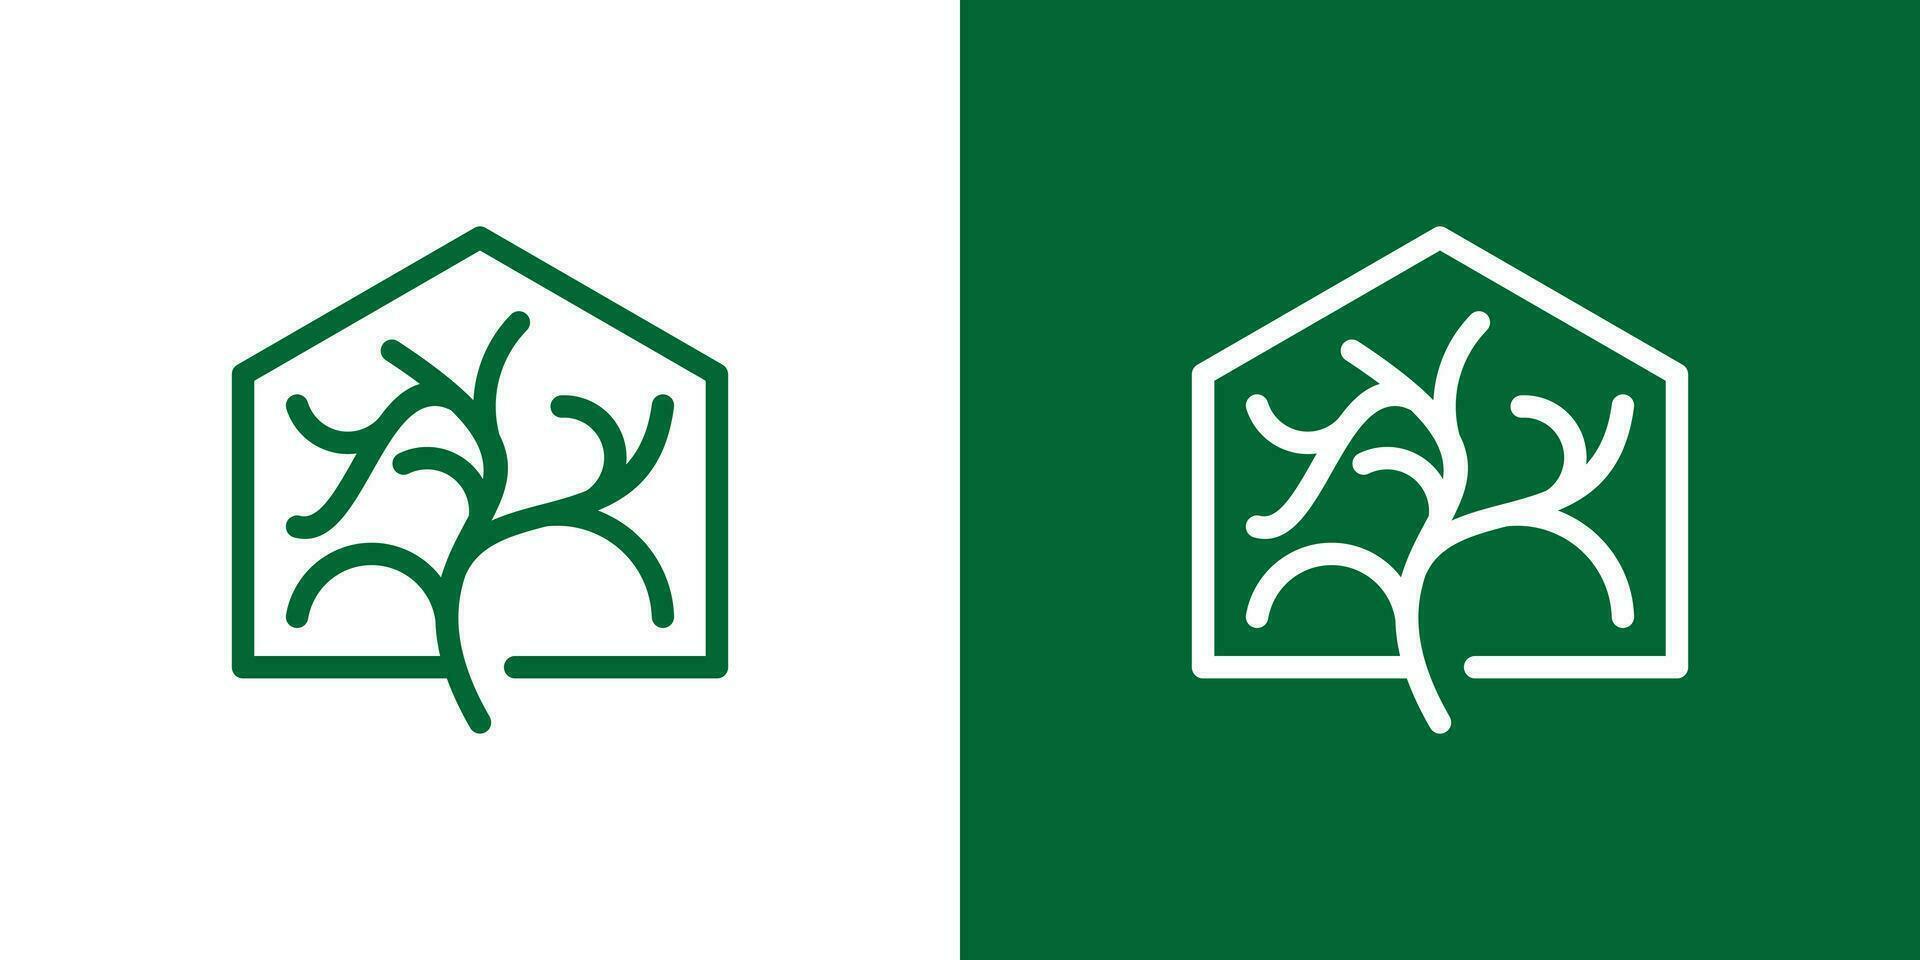 green house logo design with tree and building elements. vector